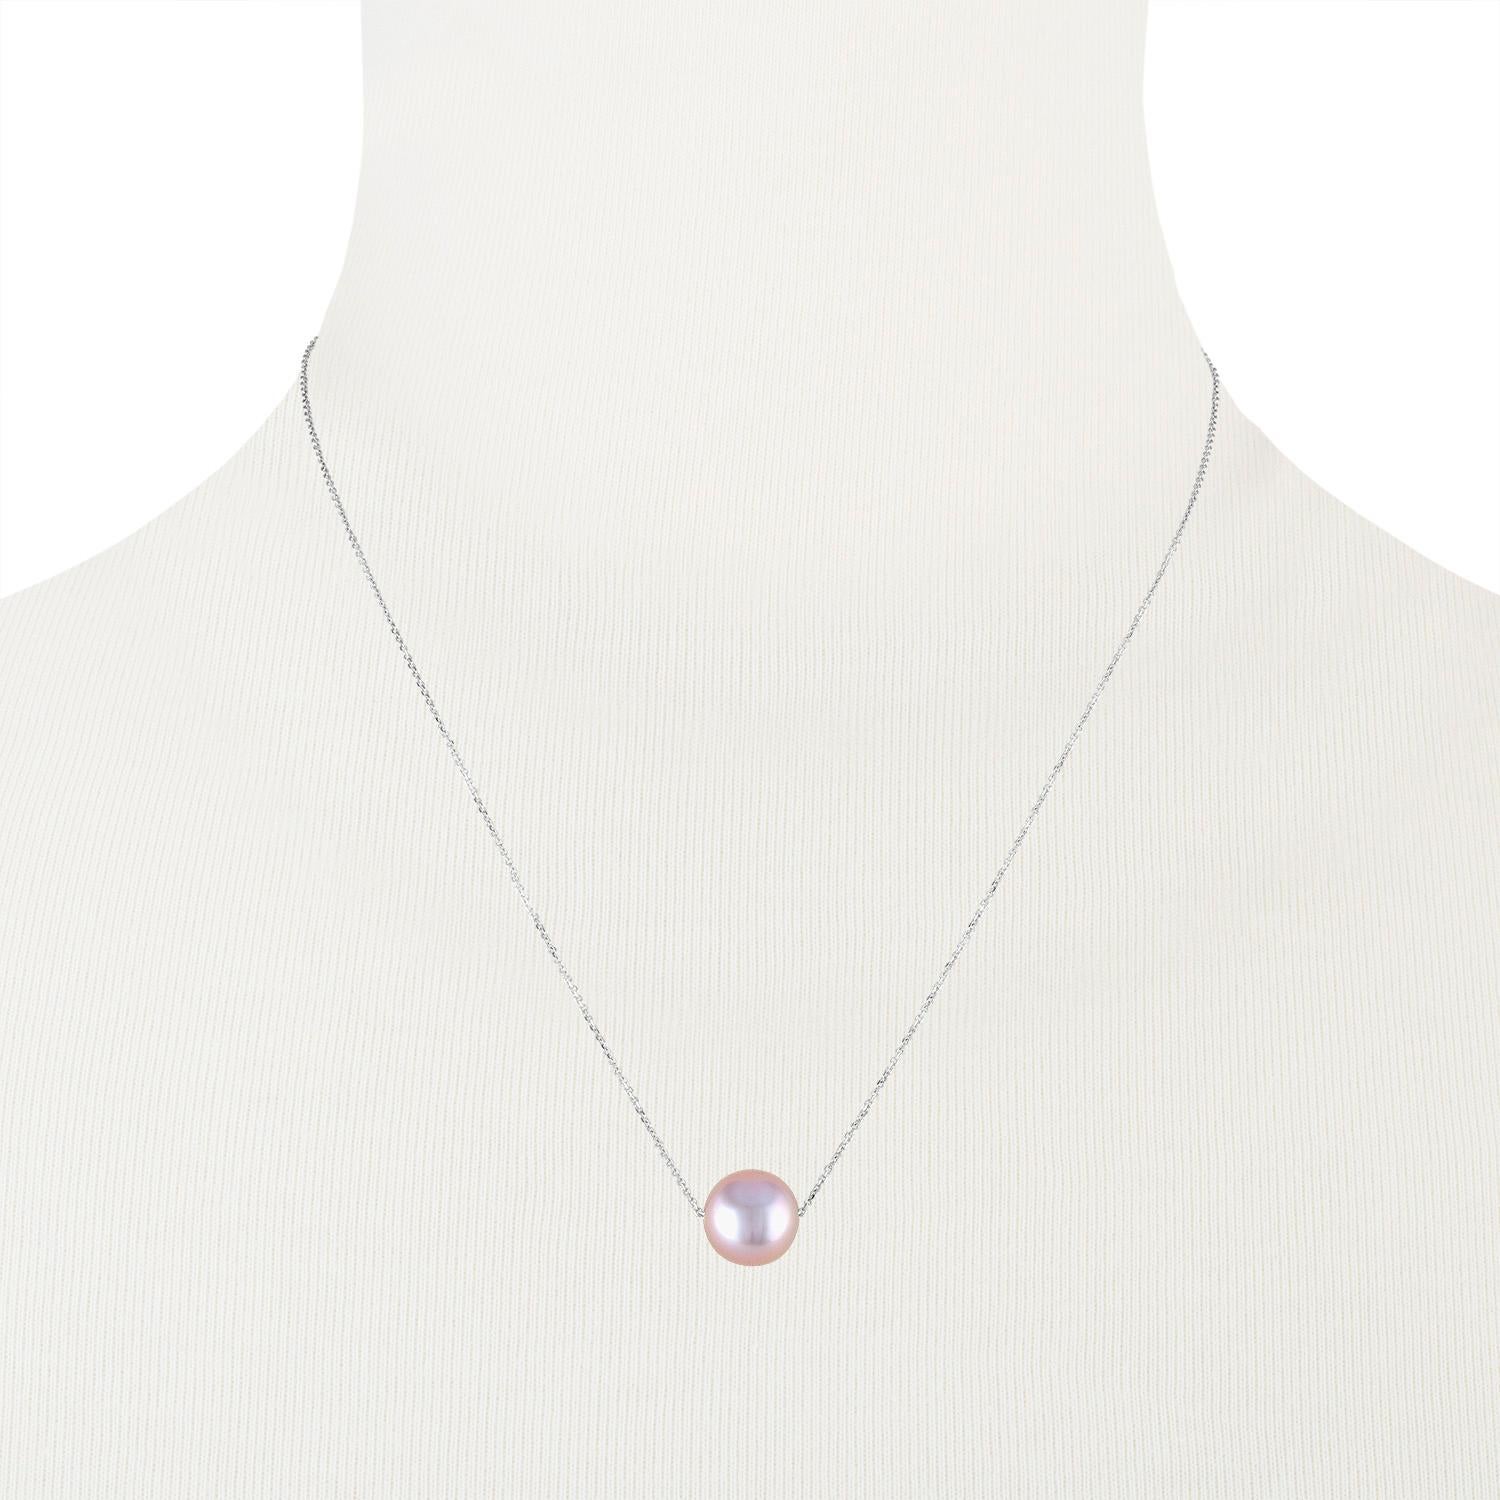 This simple yet elegant pendant features a beautiful, intense, natural-colored, round Chinese Freshwater pink cultured pearl on a 14k White Gold adjustable length chain. The pearl measures 10.7mm and the chain can be adjusted to as long as 18